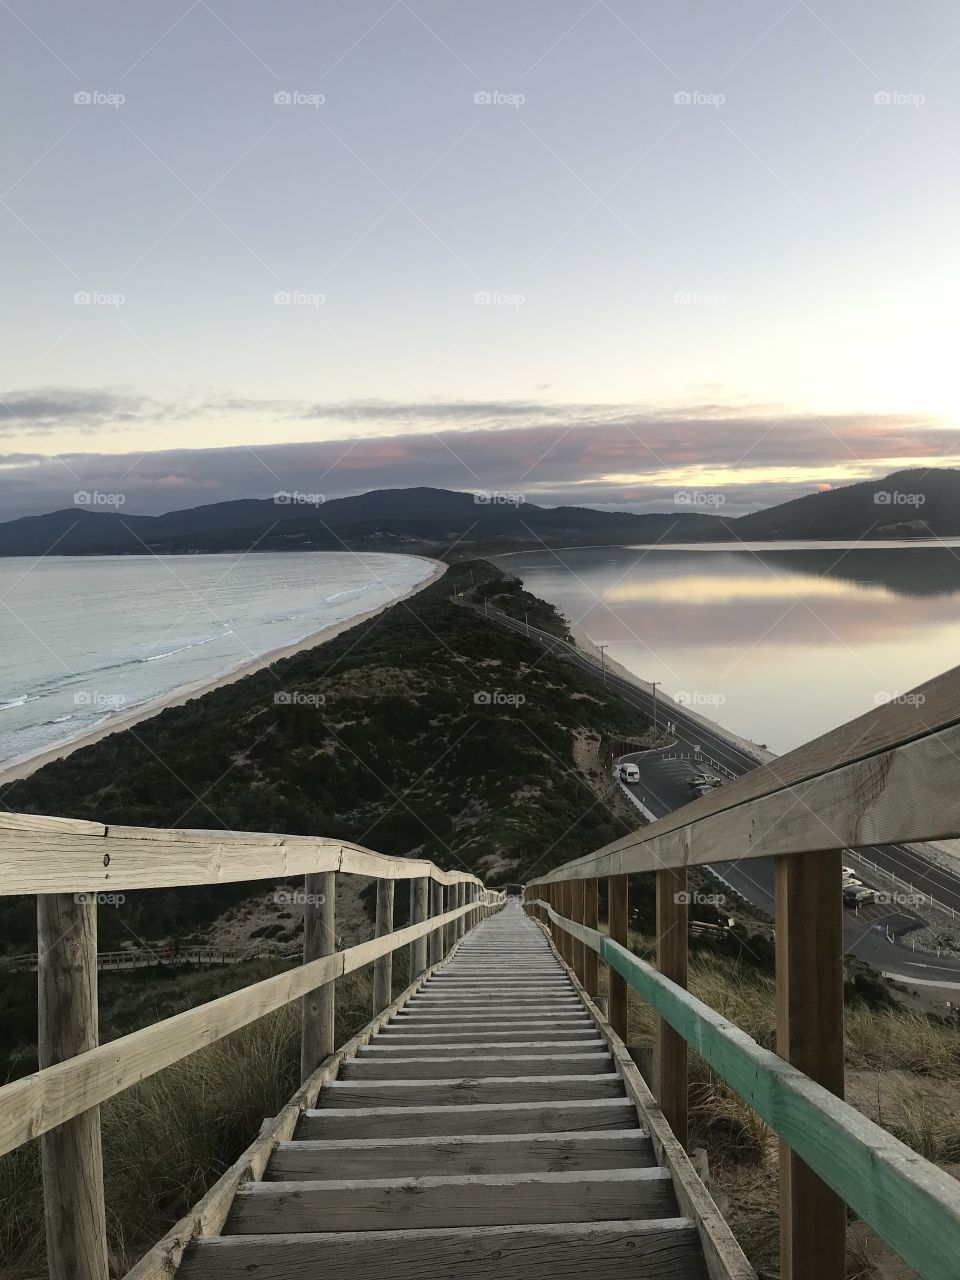 Stairway with a beautiful nature view of ‘The Neck’ on Bruny Island